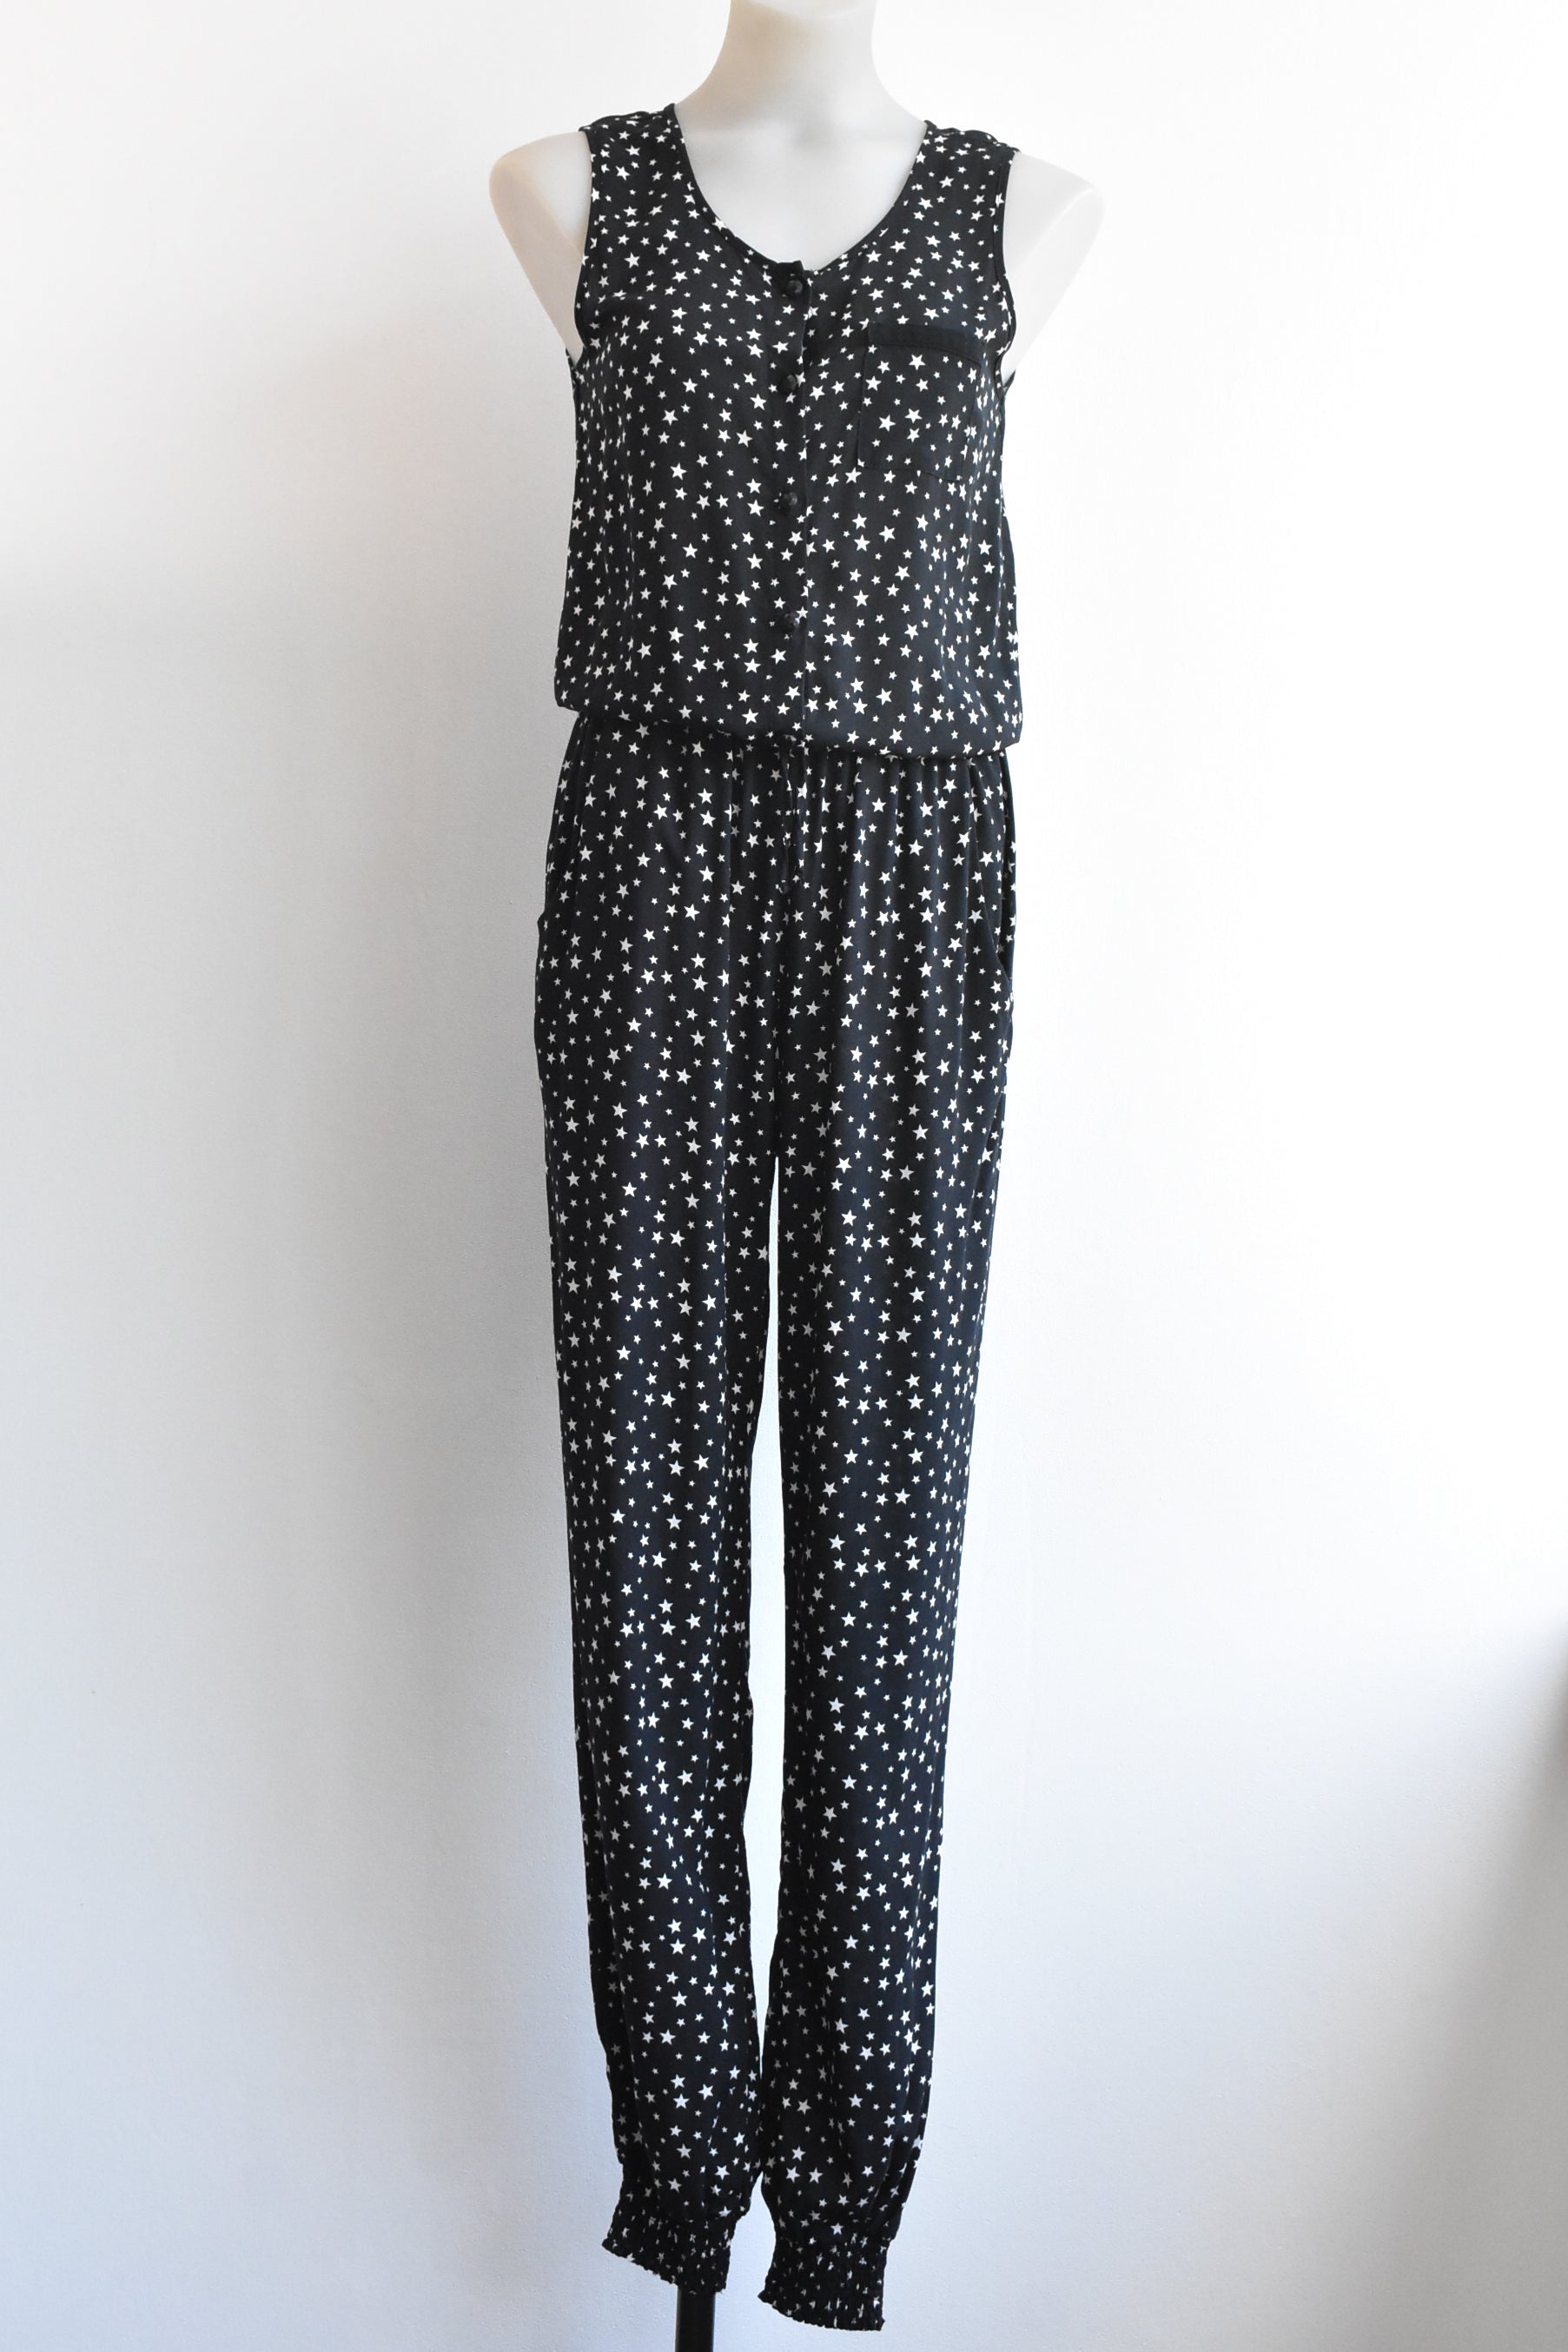 Candy Couture starry jumpsuit, size XS – Shop on Carroll Online